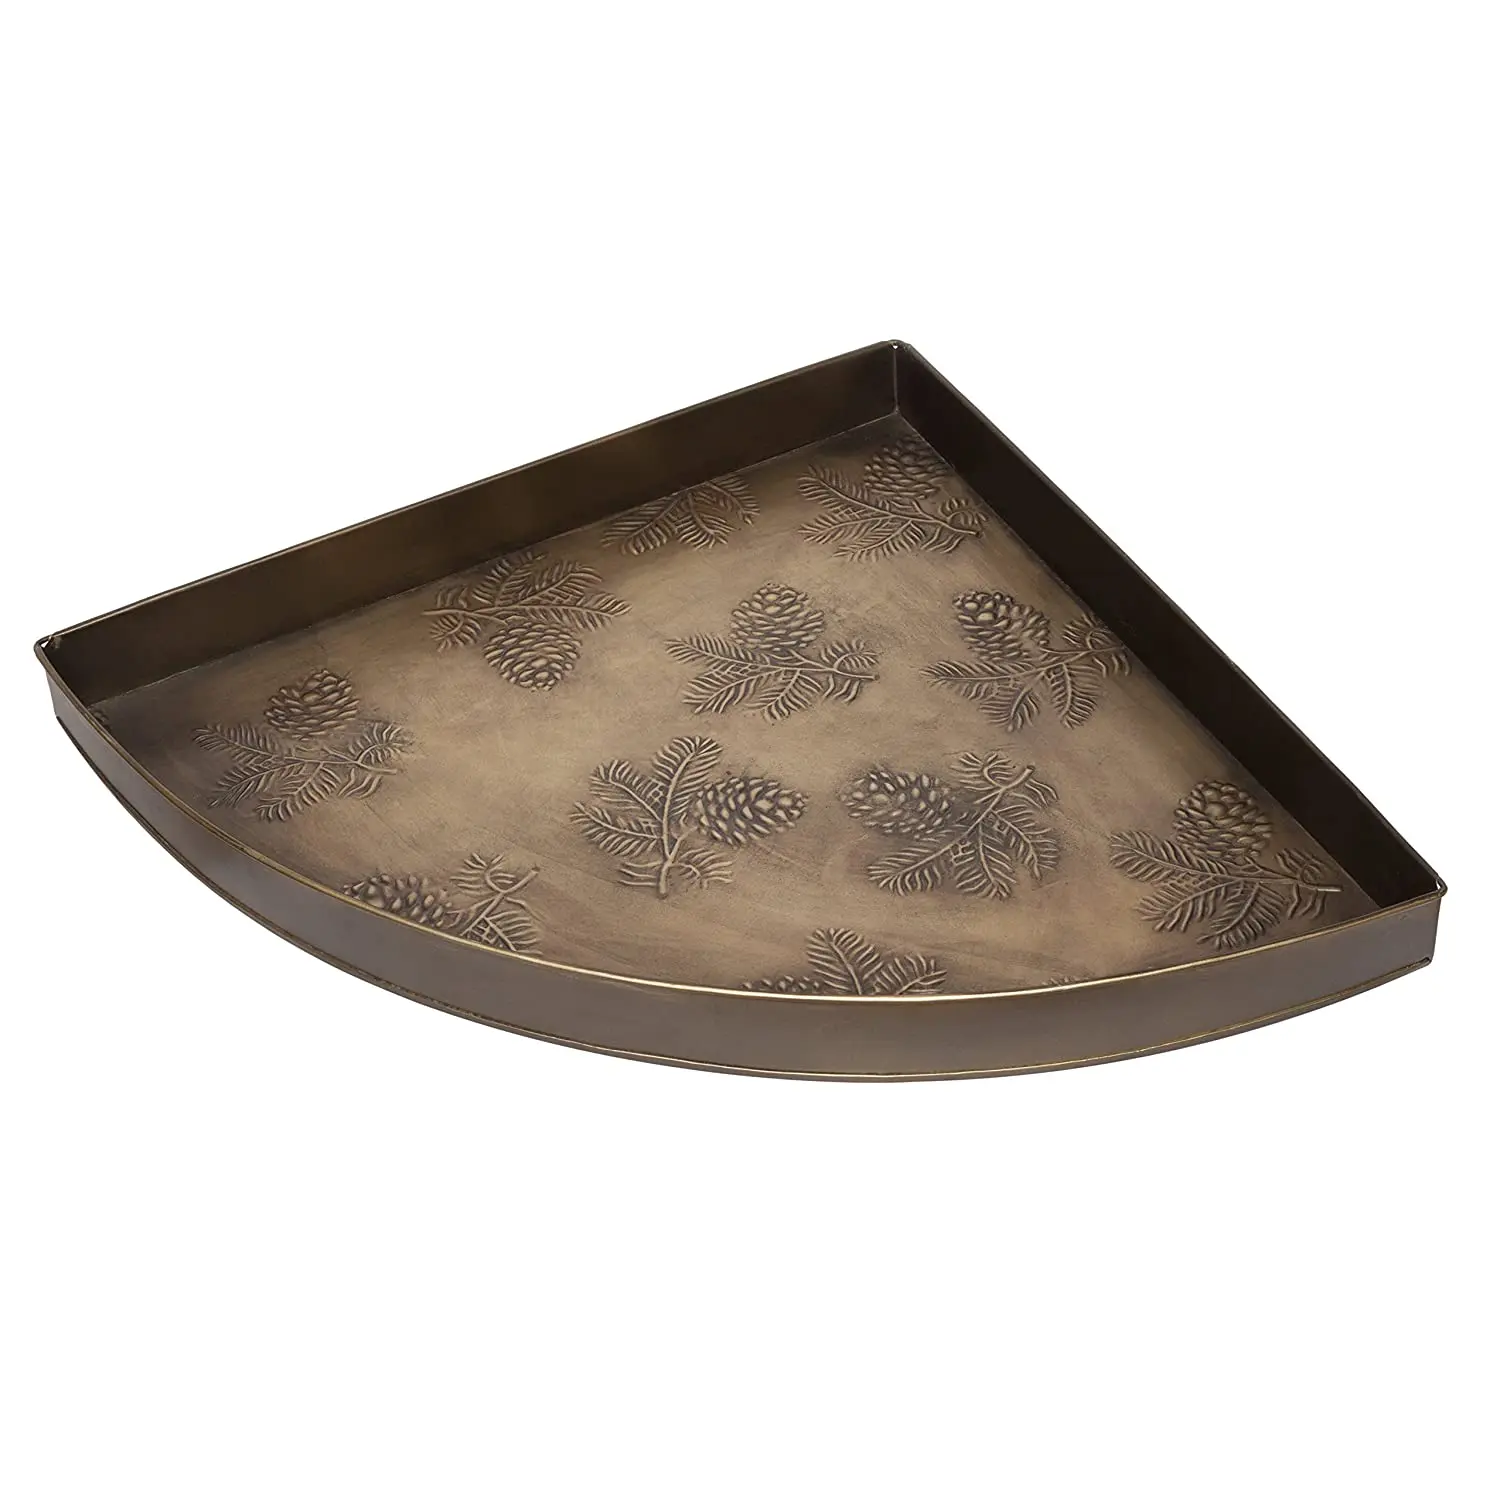 Dark Copper-Colored Metal Boot Tray with Embossed Tree of Life Design